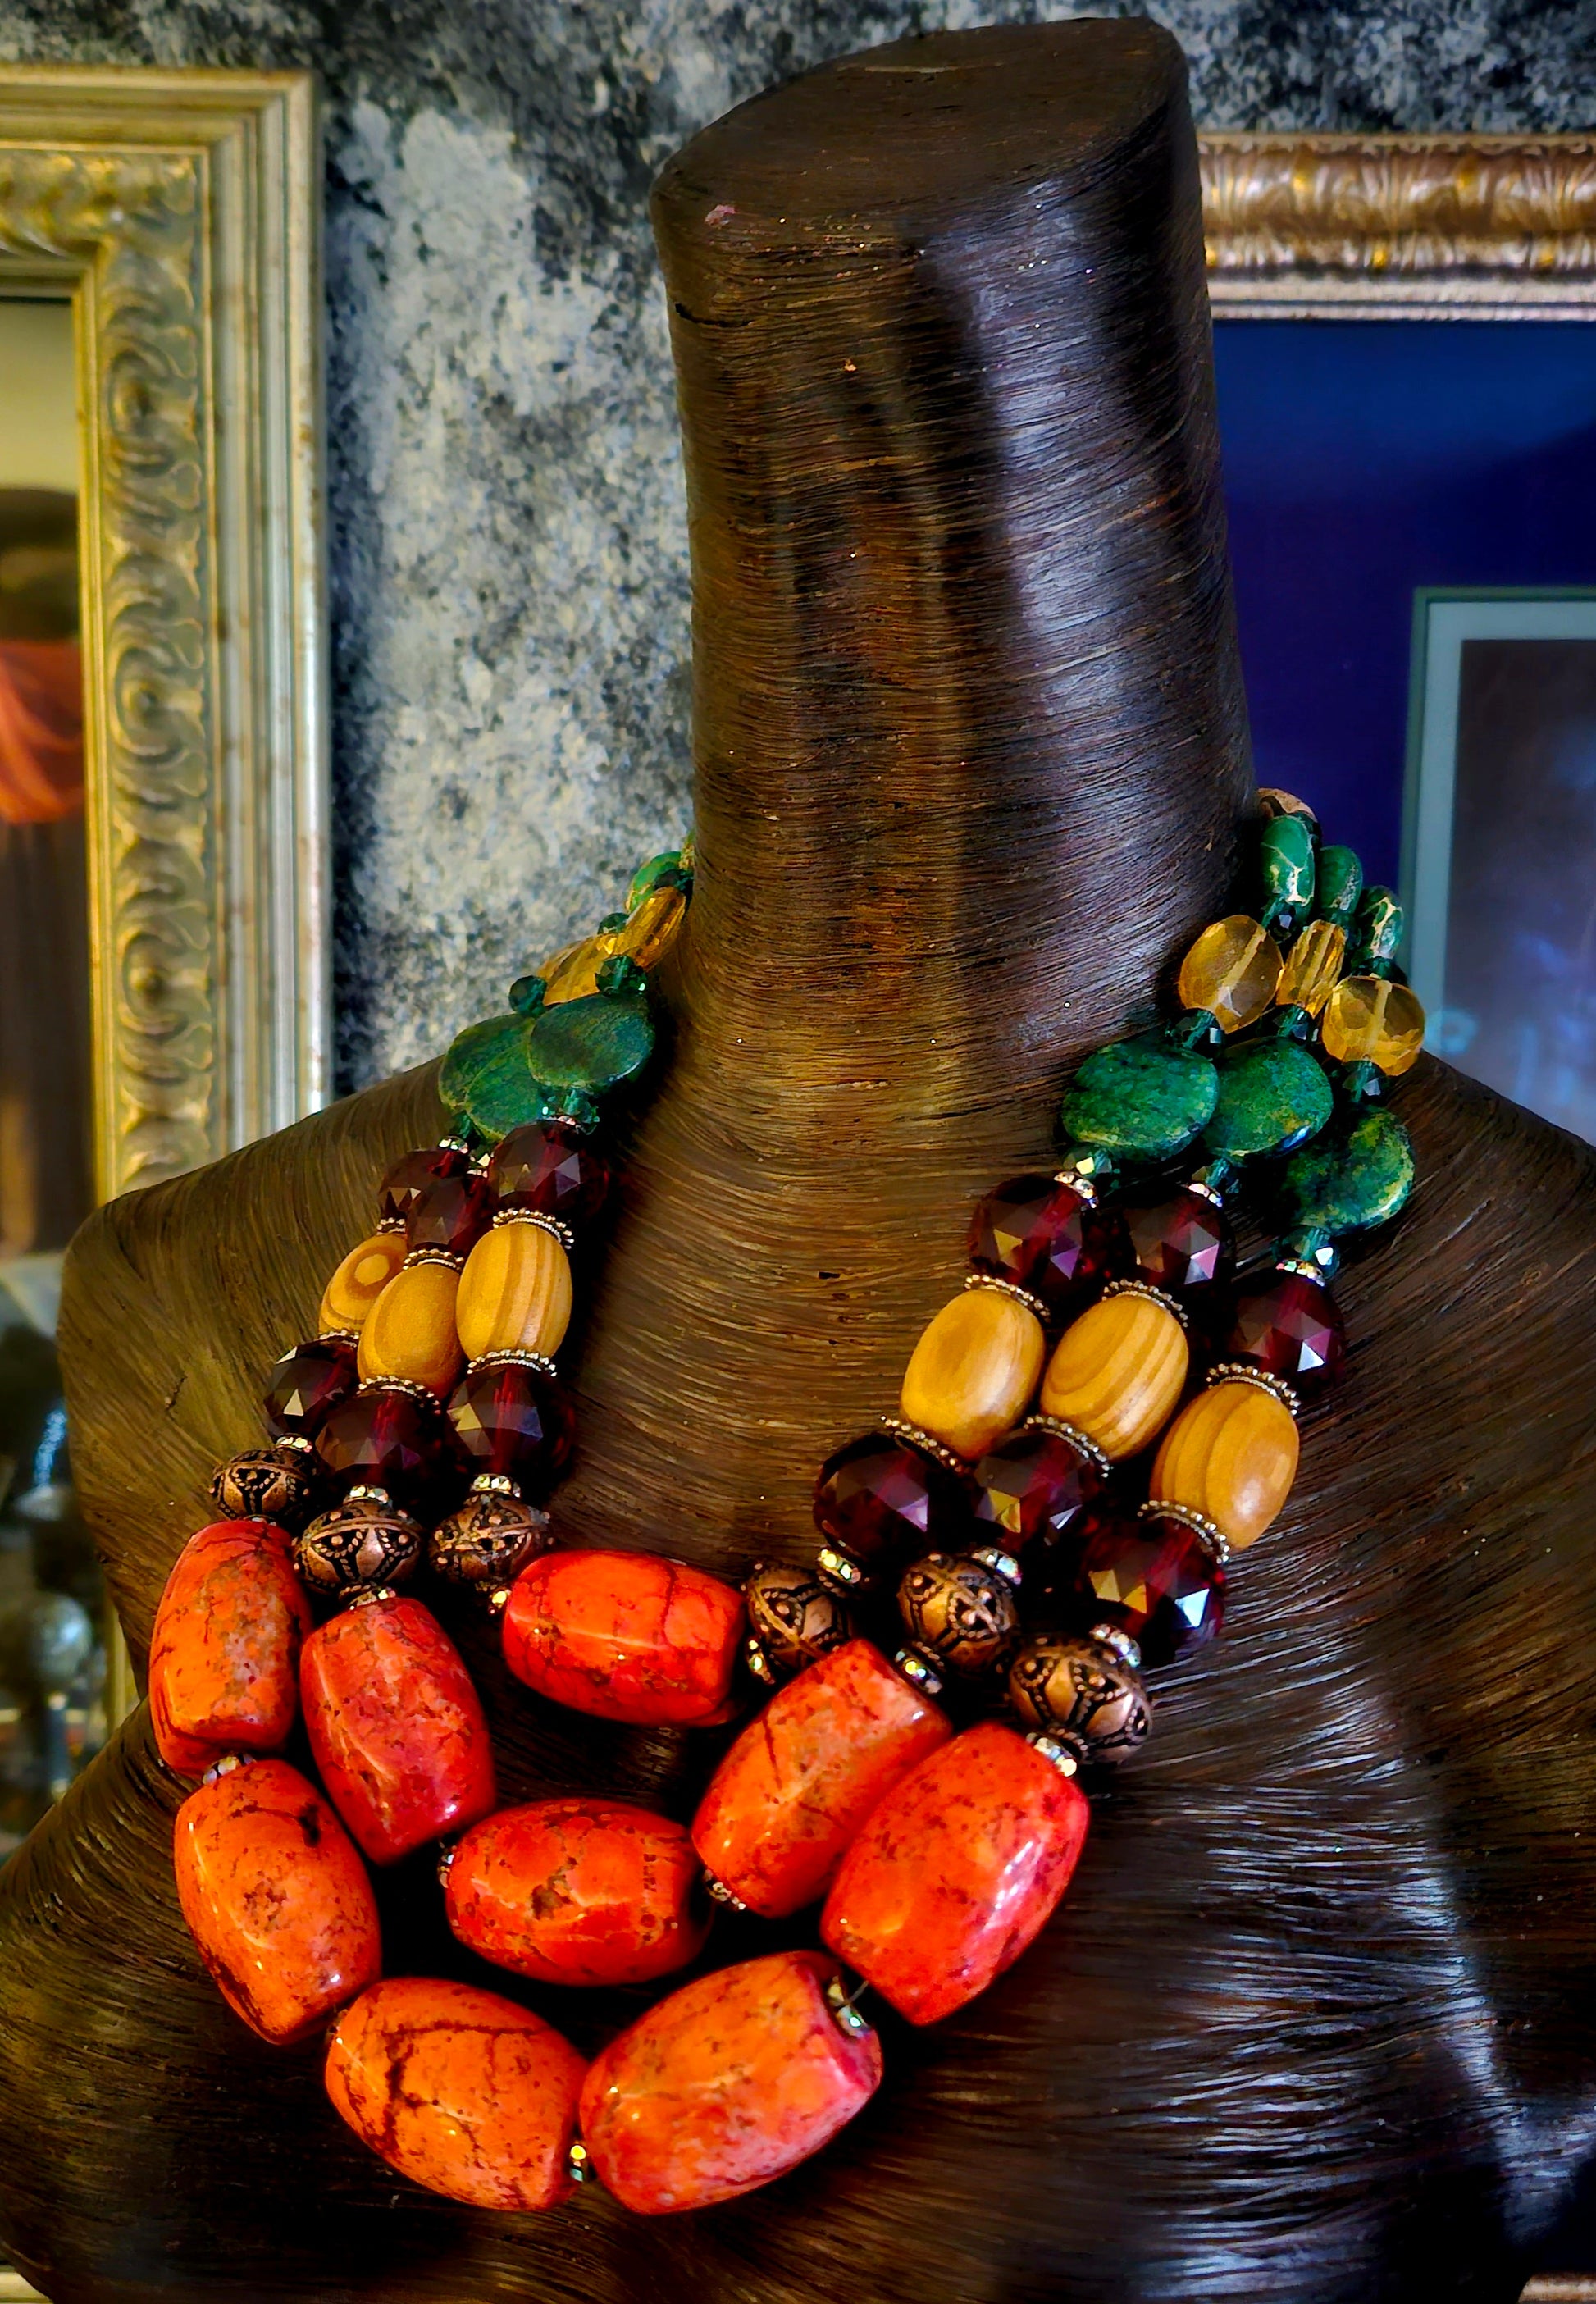 Large Statement Necklace with Chunky Beads